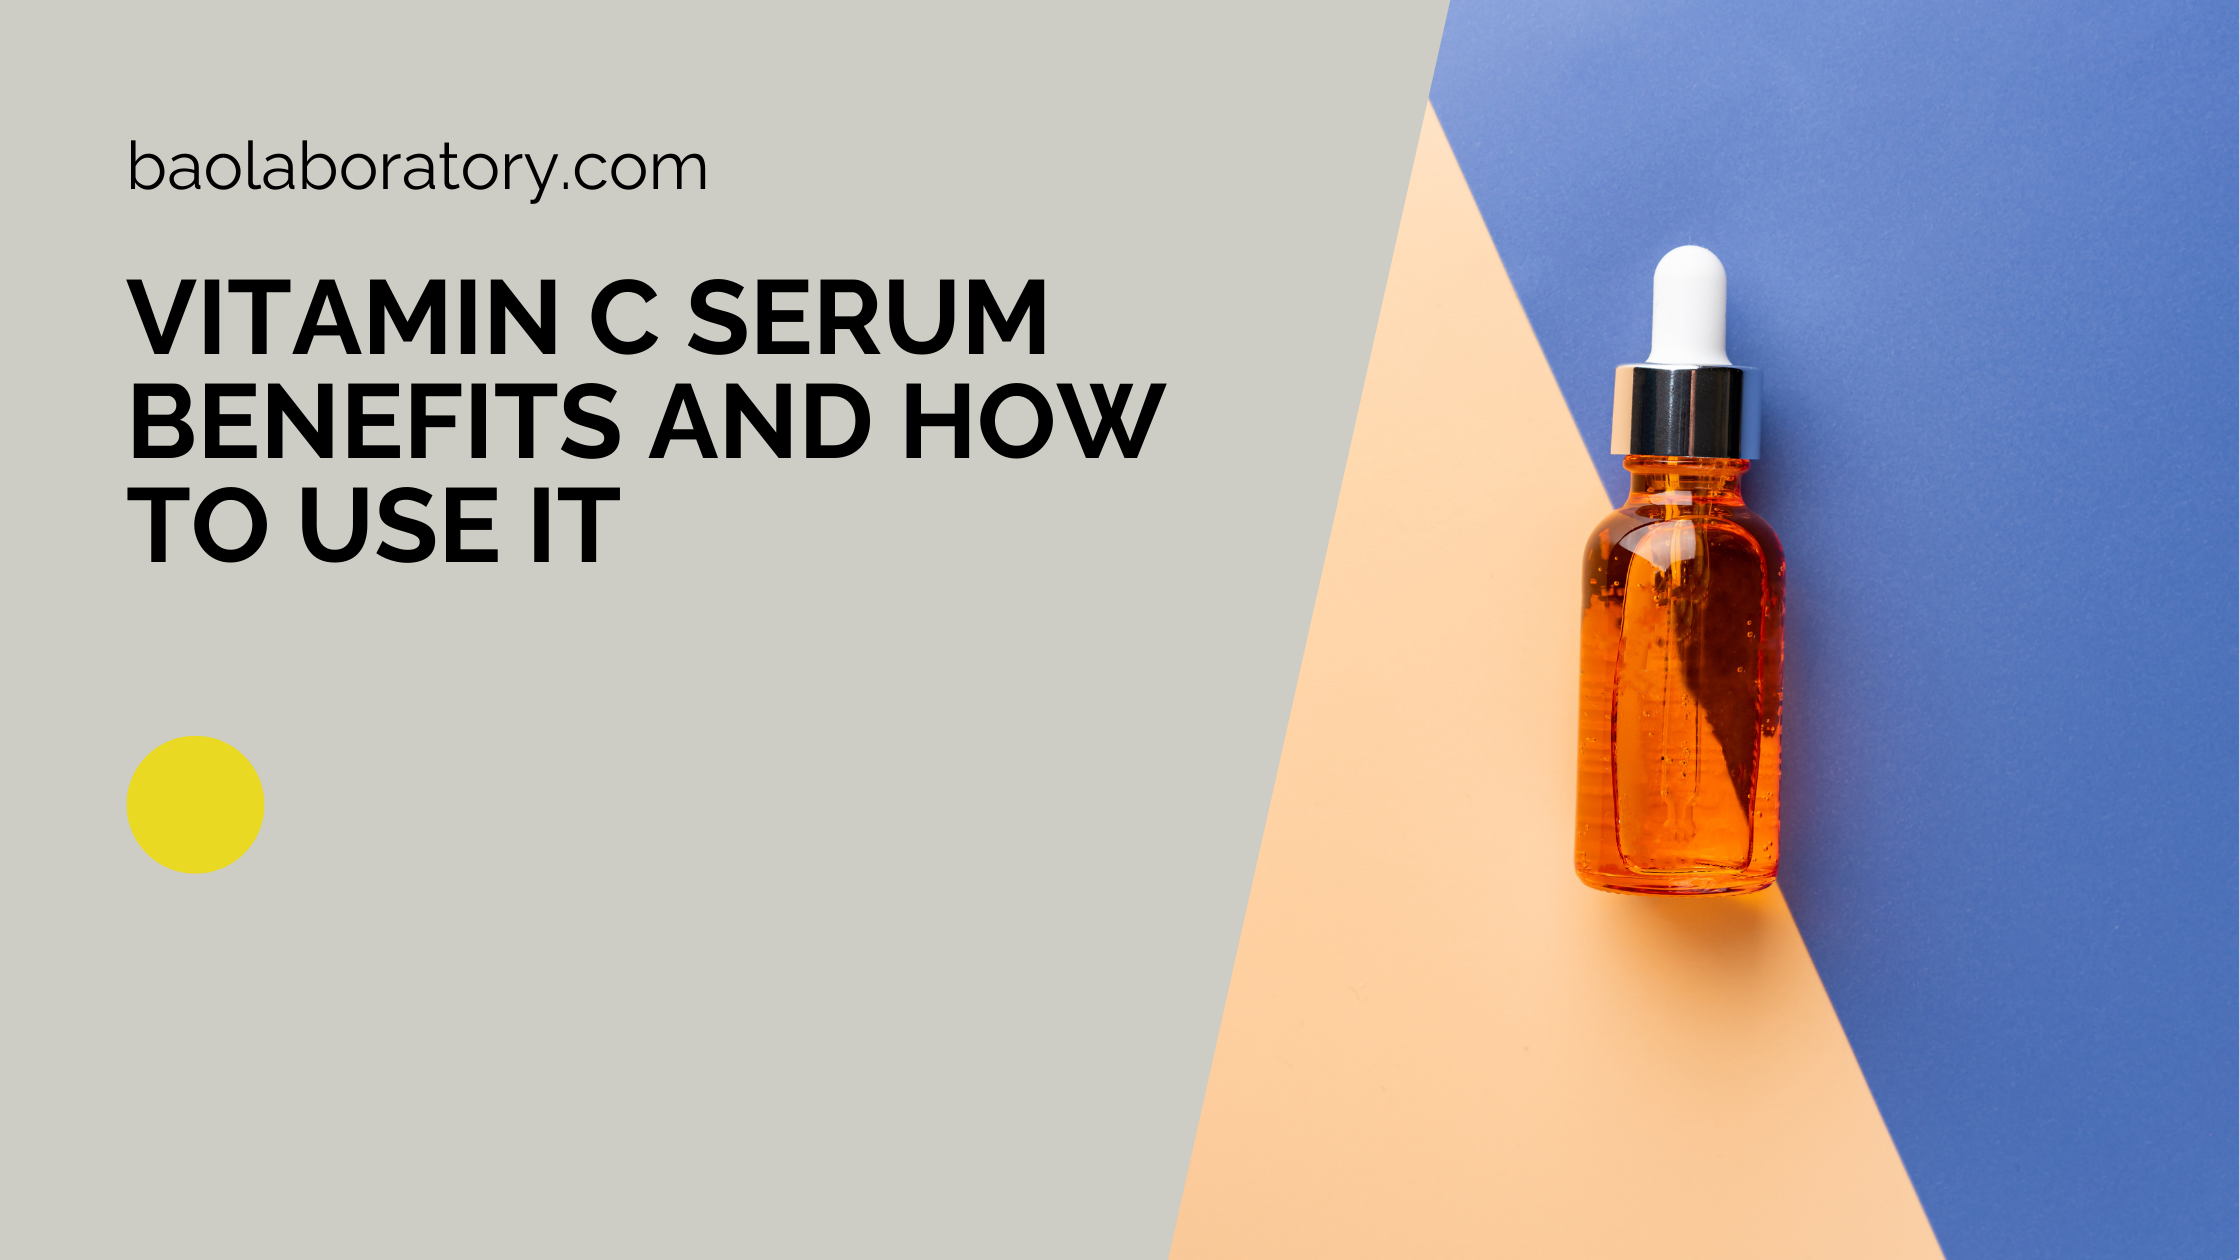 Vitamin C Serum Benefits and How to Use It